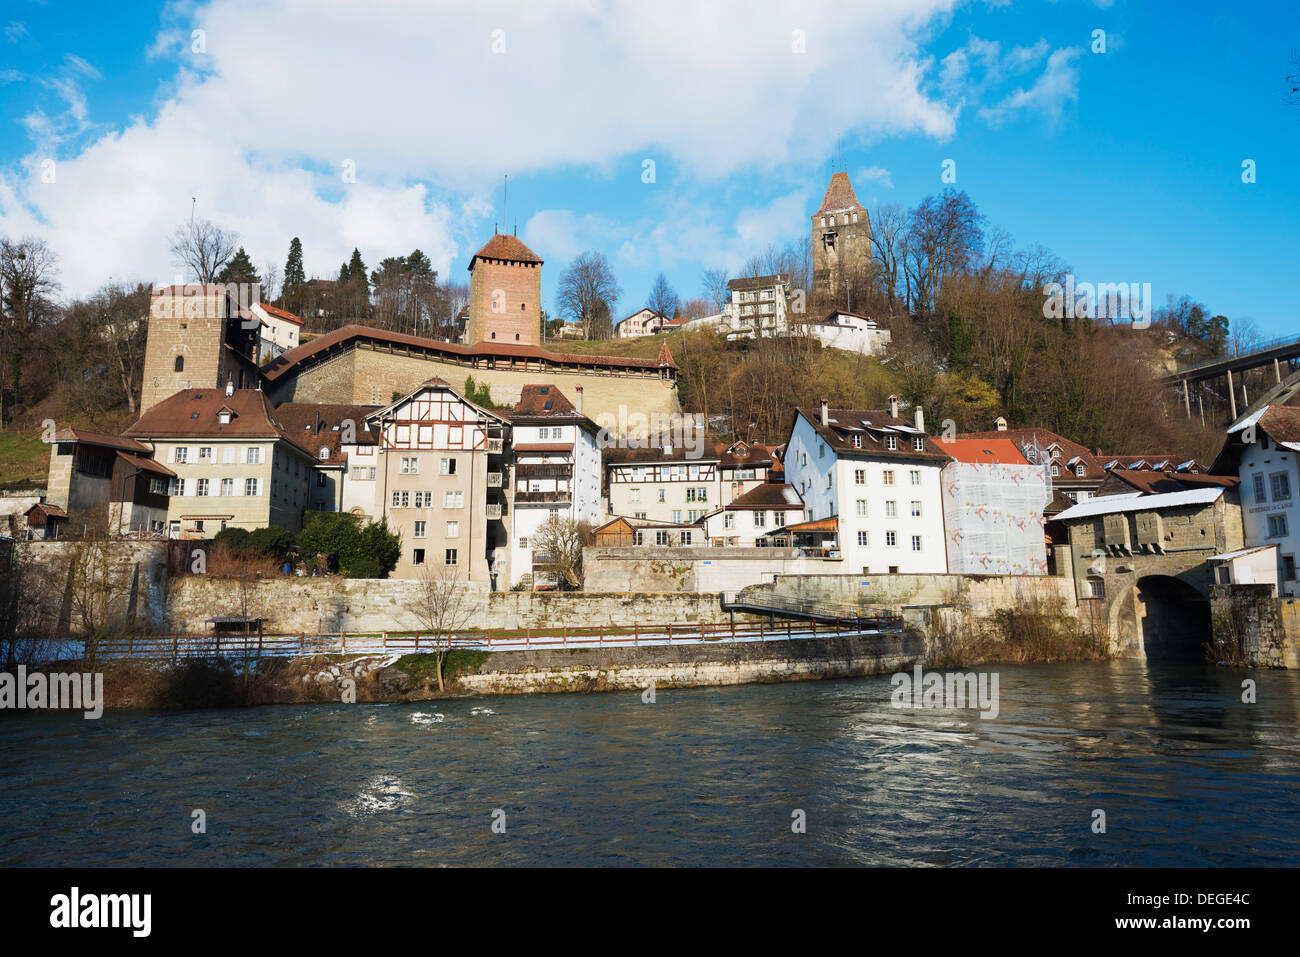 The 12th century Old Town, Fribourg, Switzerland, Europe Stock Photo